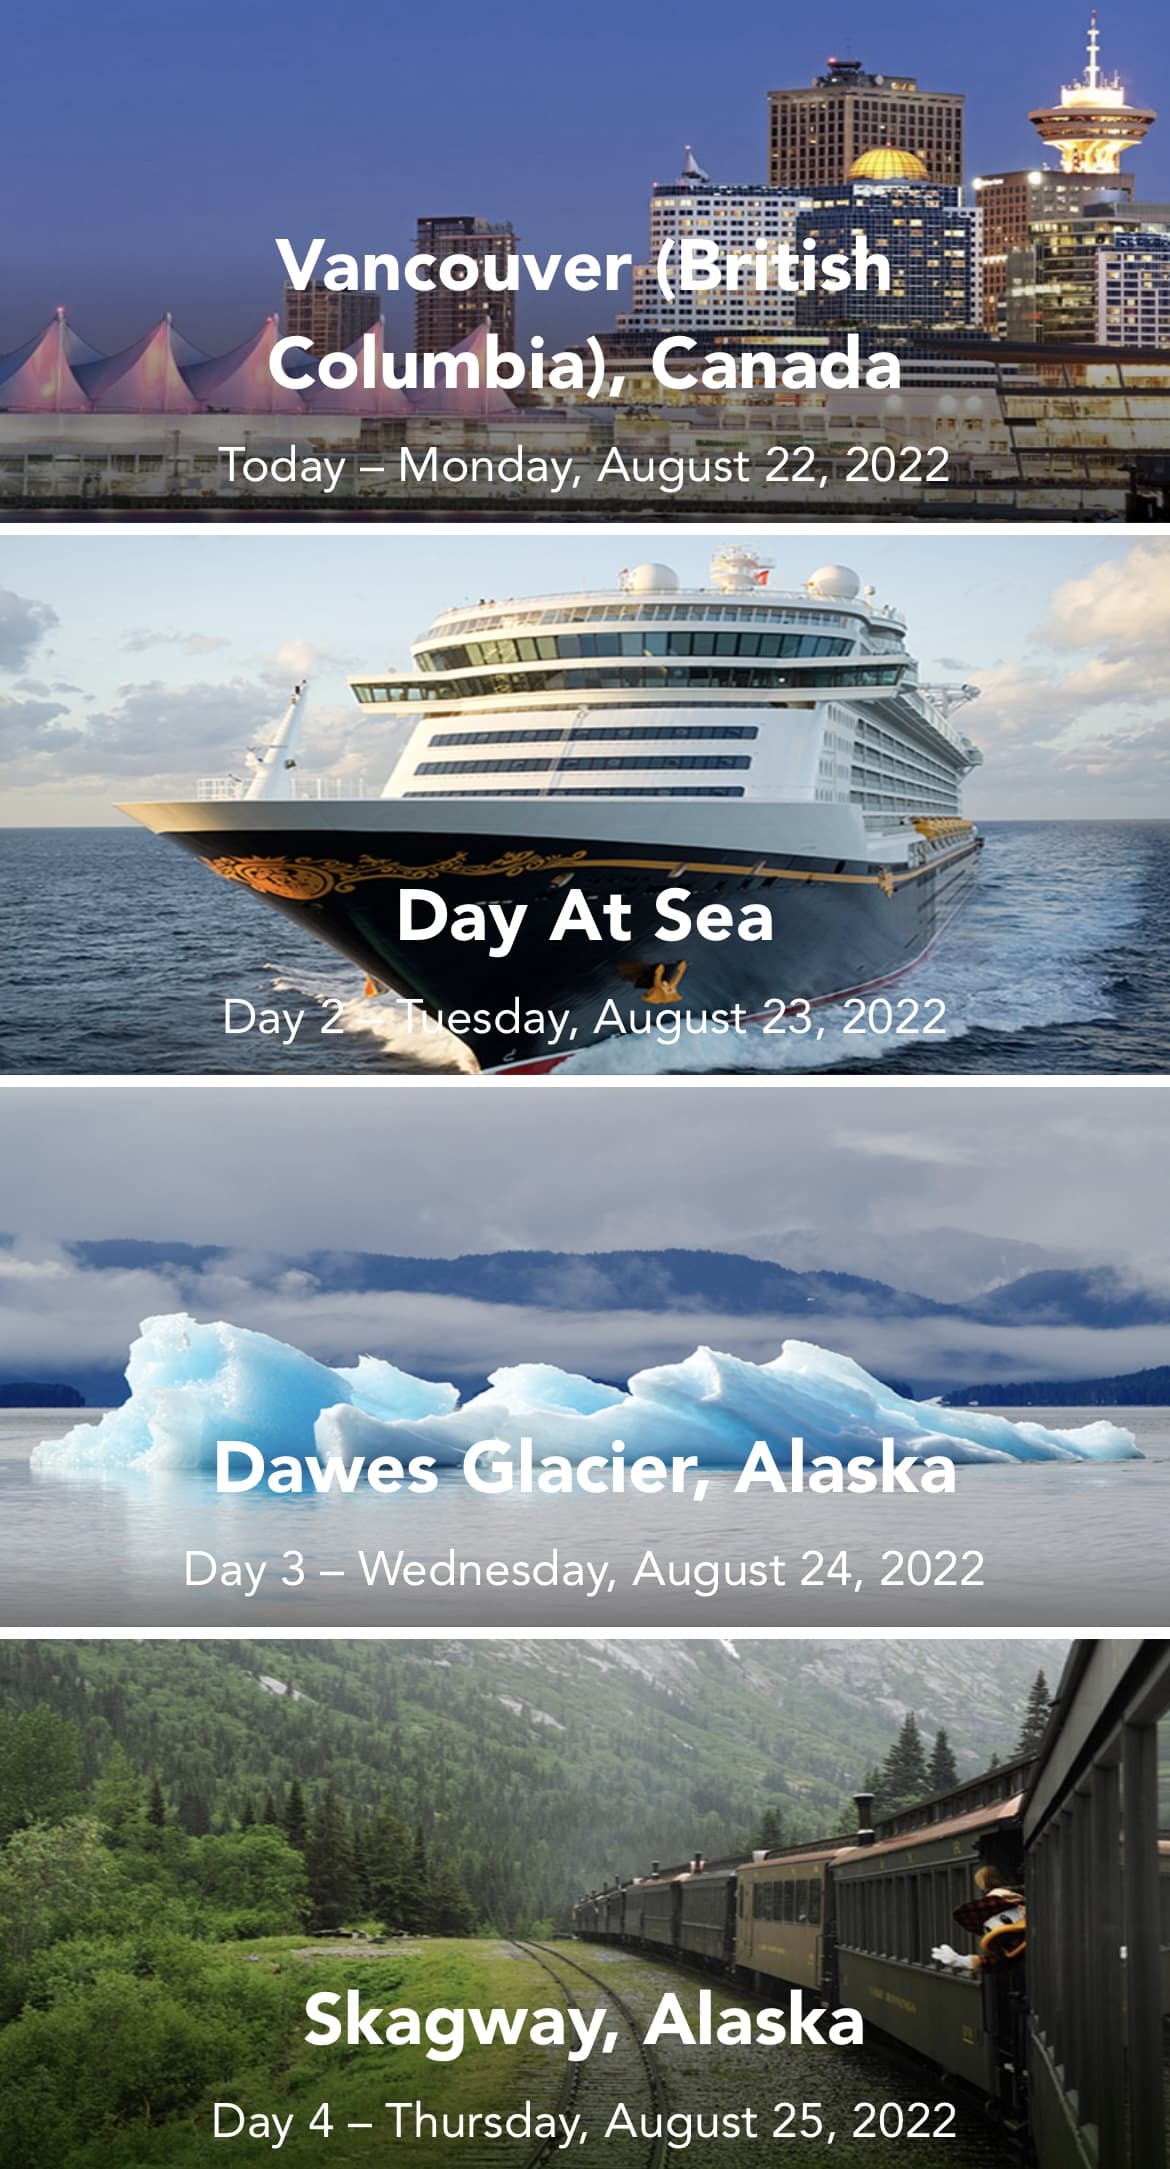 A collage showing the Disney Wonder Alaska itinerary with pictures of the ship and stop highlights.